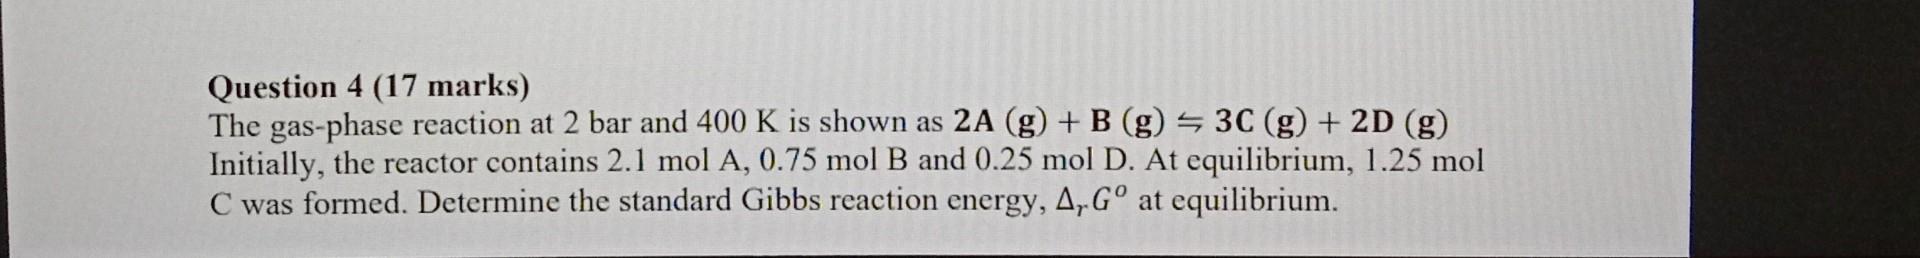 Question 4 (17 marks)
The gas-phase reaction at 2 bar and \( 400 \mathrm{~K} \) is shown as \( \mathbf{2 A}(\mathbf{g})+\math